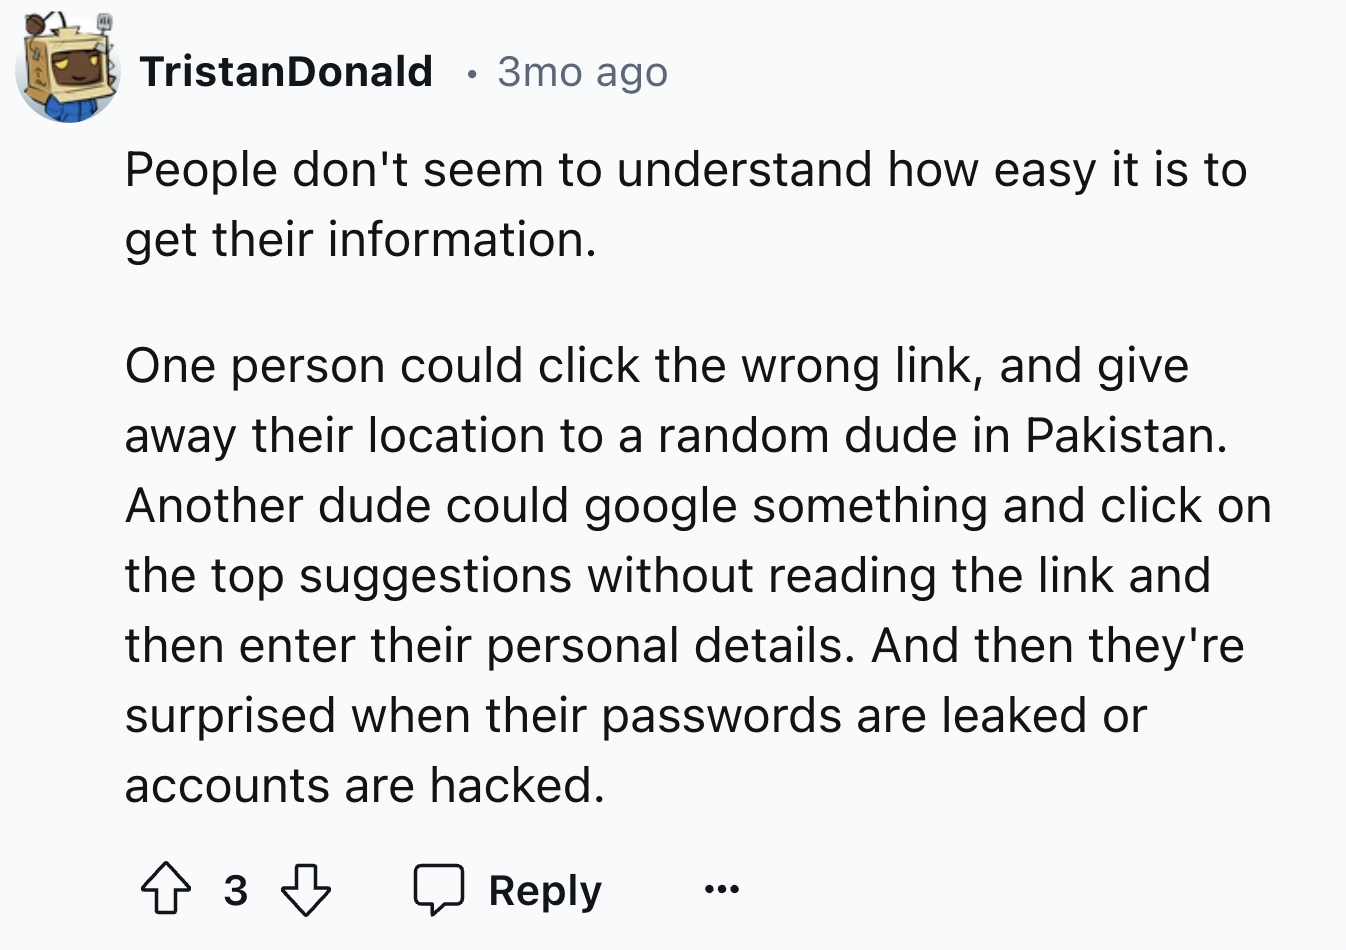 screenshot - Tristan Donald 3mo ago People don't seem to understand how easy it is to get their information. One person could click the wrong link, and give away their location to a random dude in Pakistan. Another dude could google something and click on